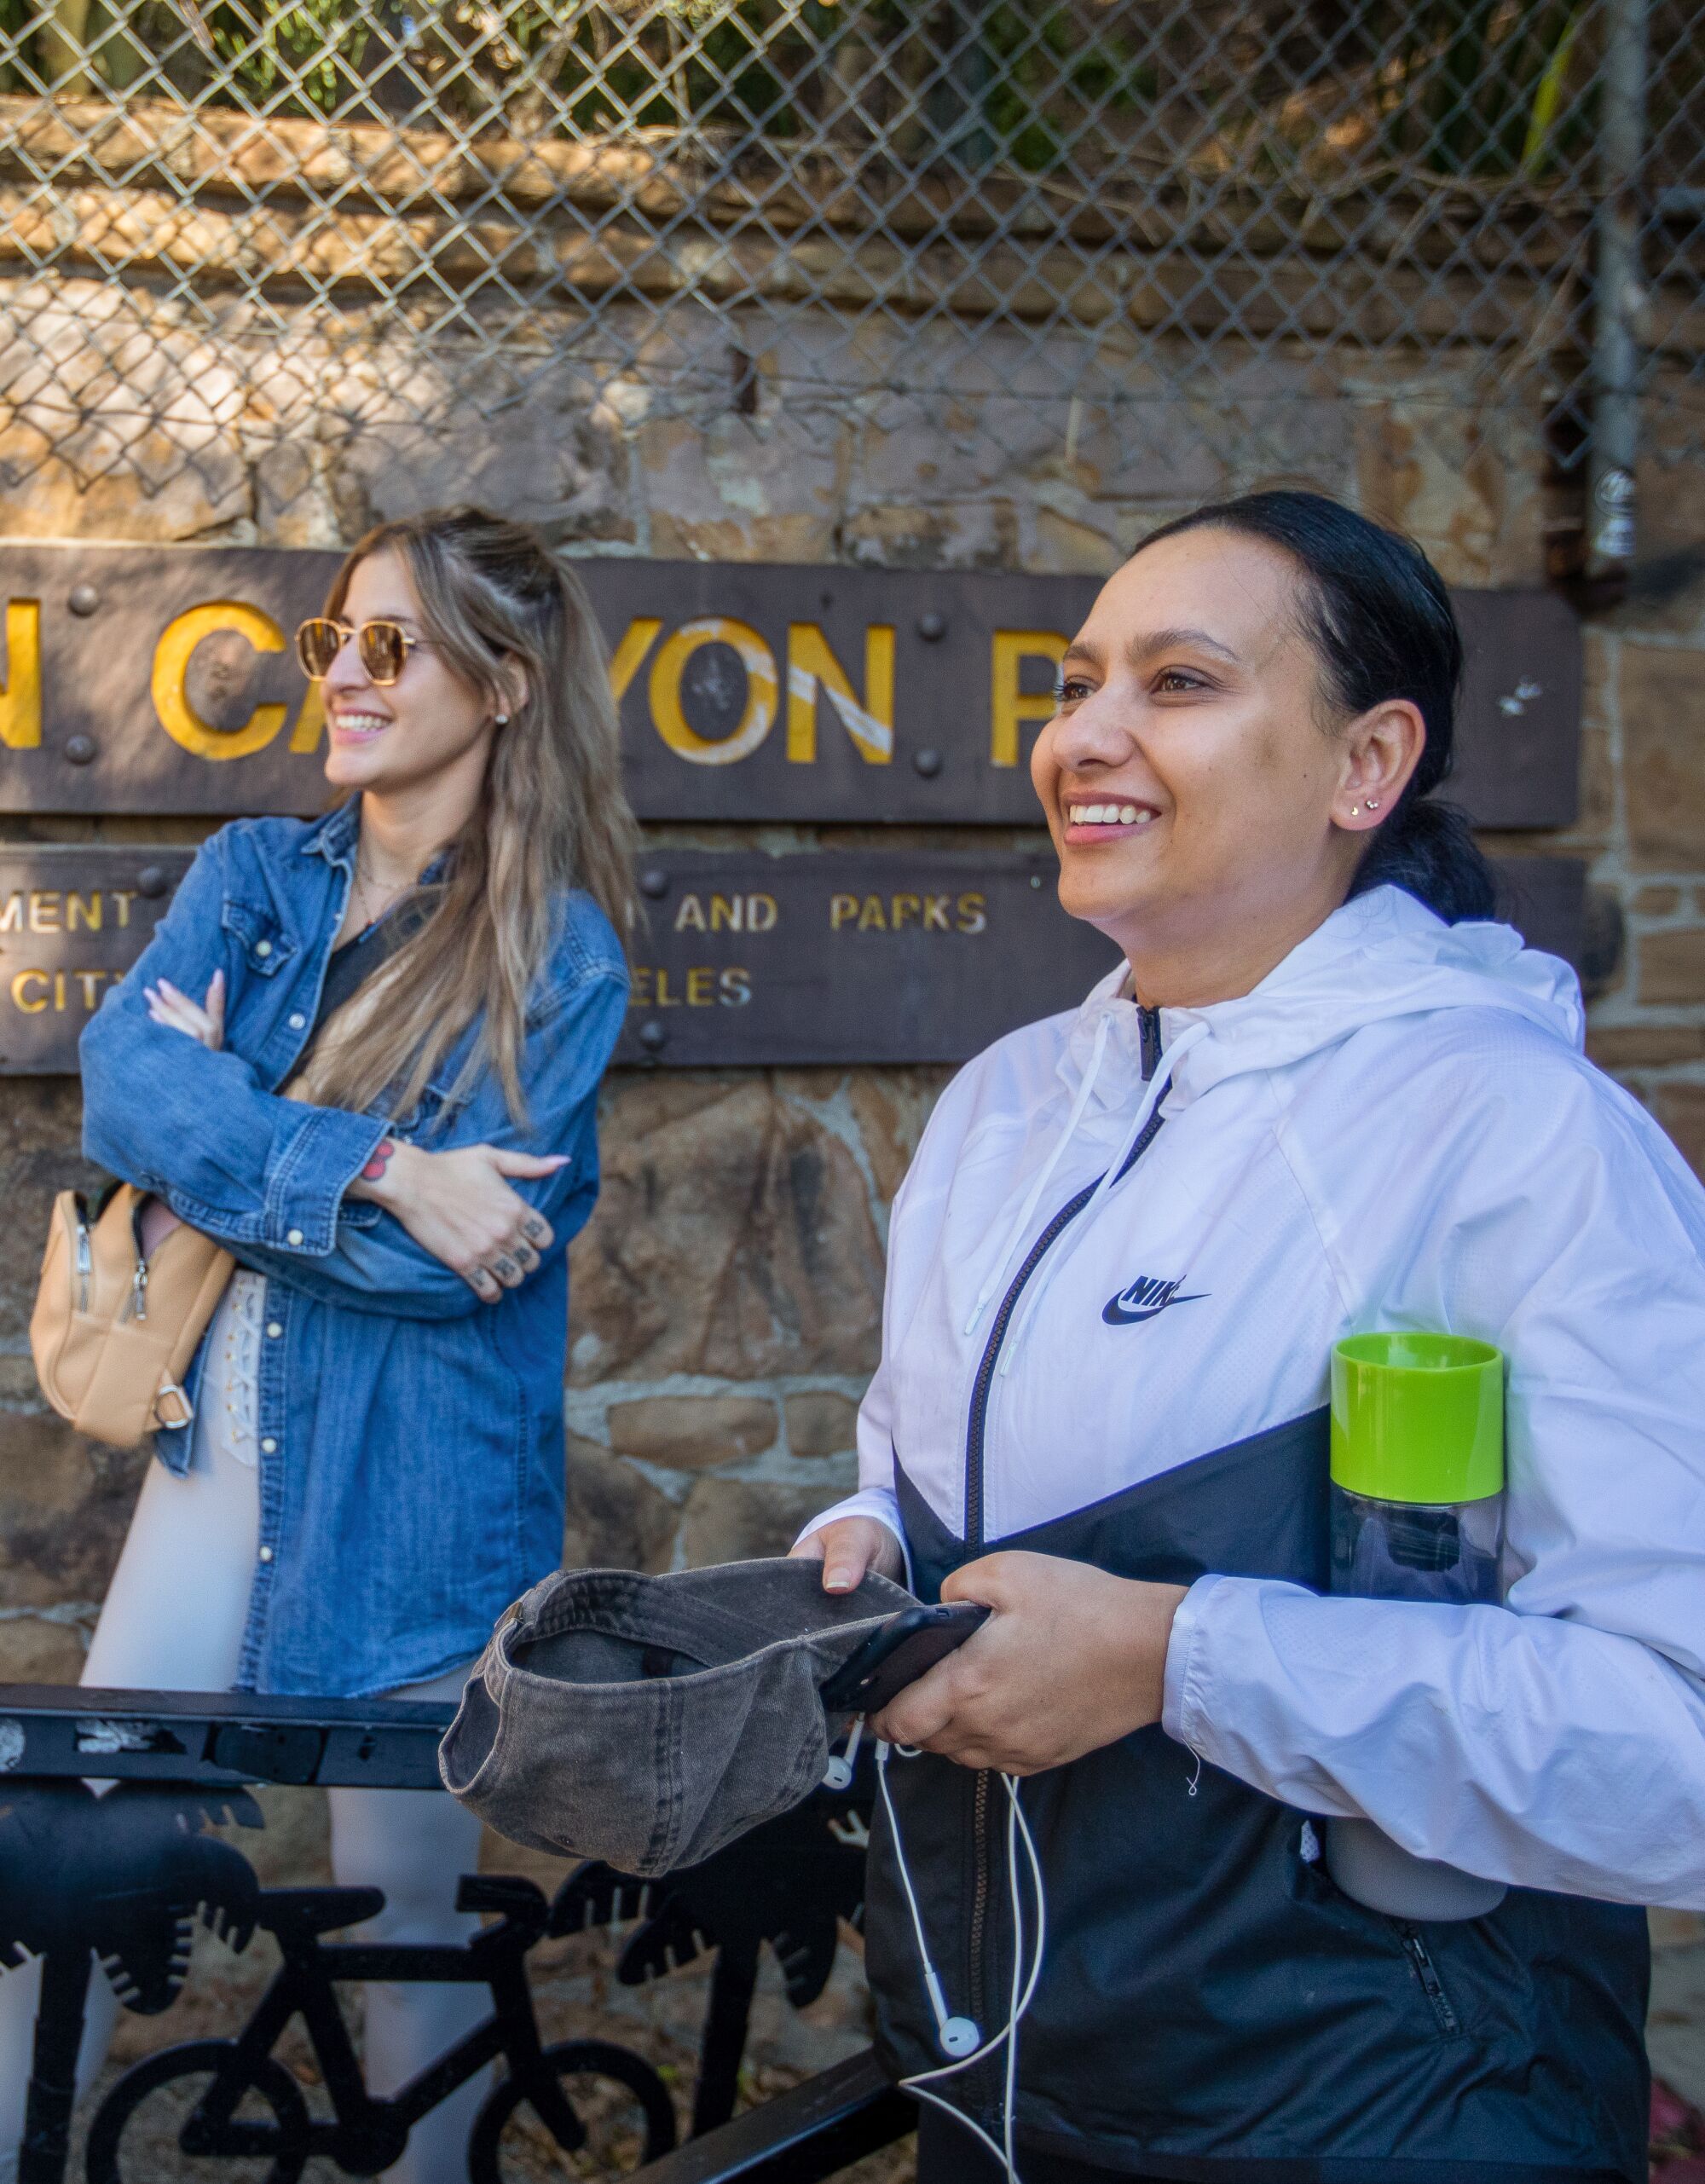 Two women in sportswear are talking to other people off-camera in front of a Runyon Canyon Park sign. 